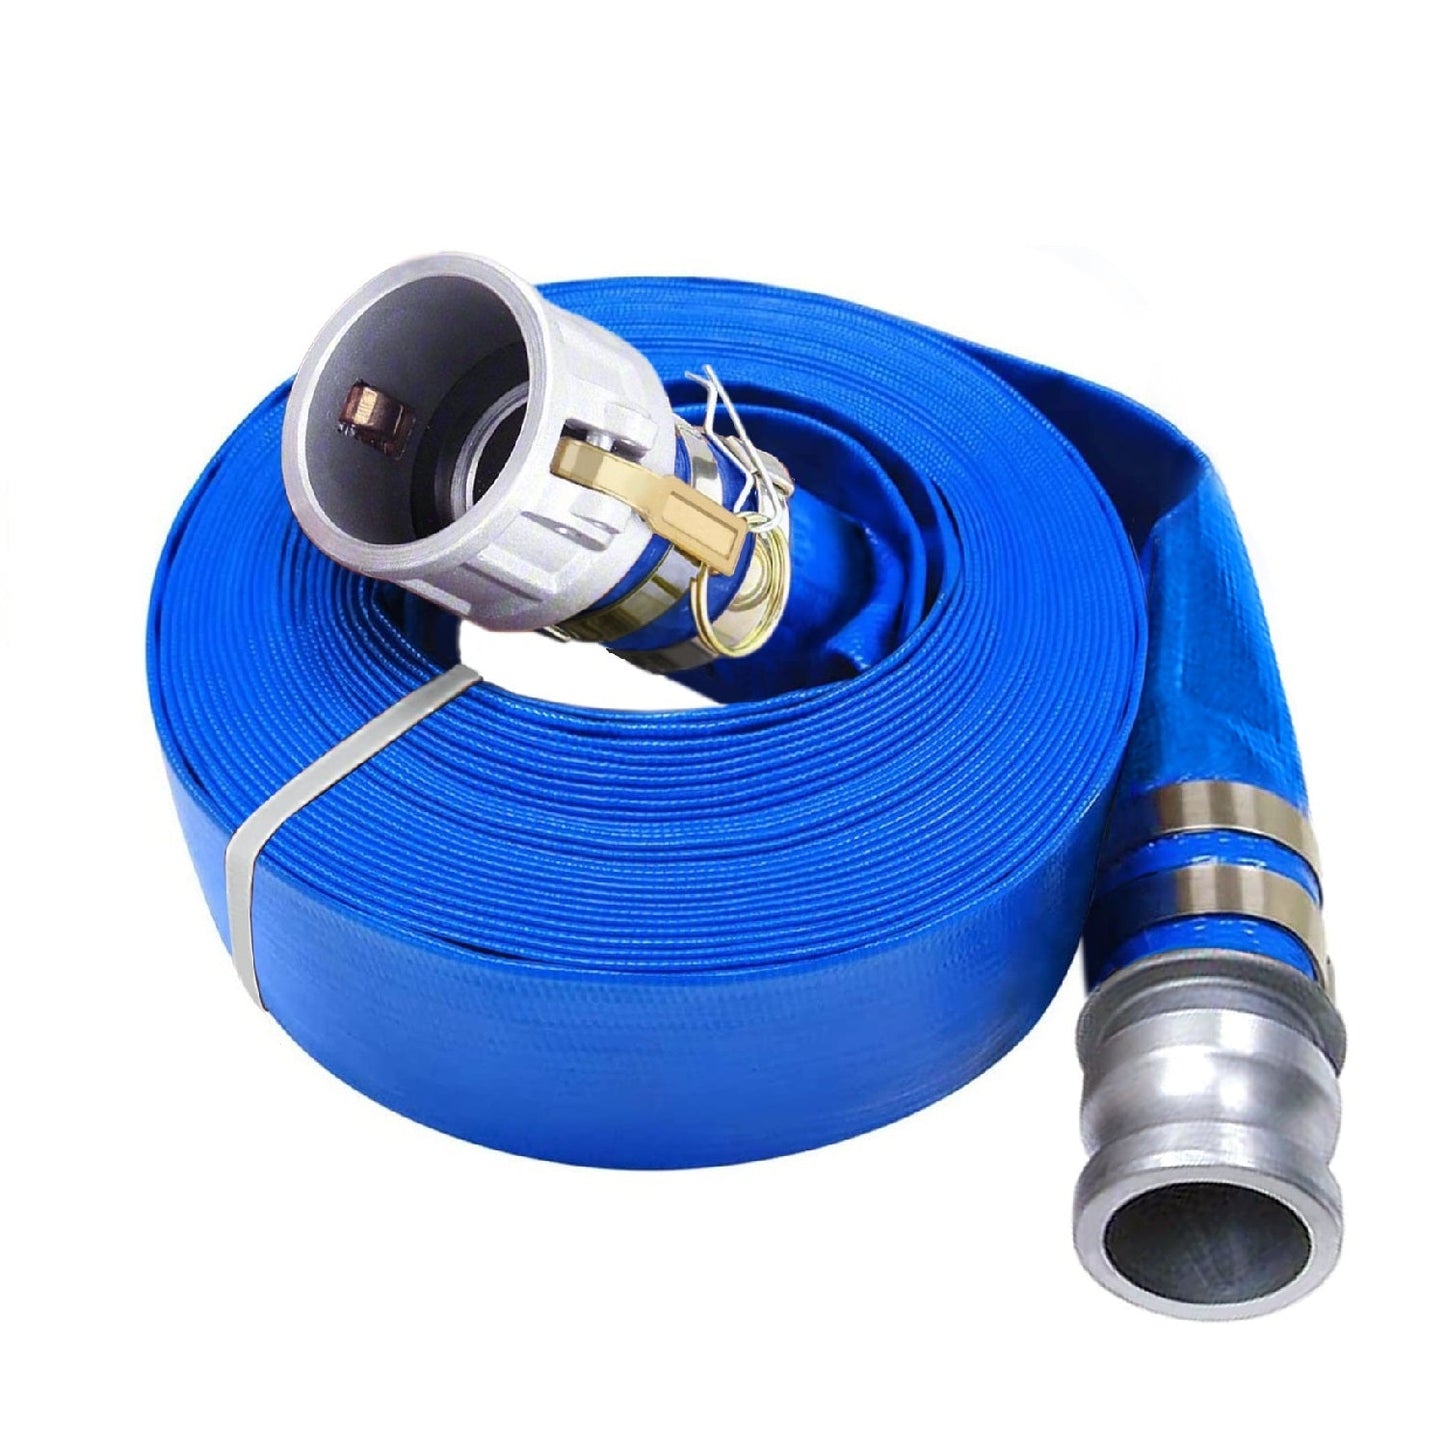 Foresee PVC 10 FT Suction Hose, 50 FT Discharge Hose, and Strainer Kit with Pin Lug Couplings